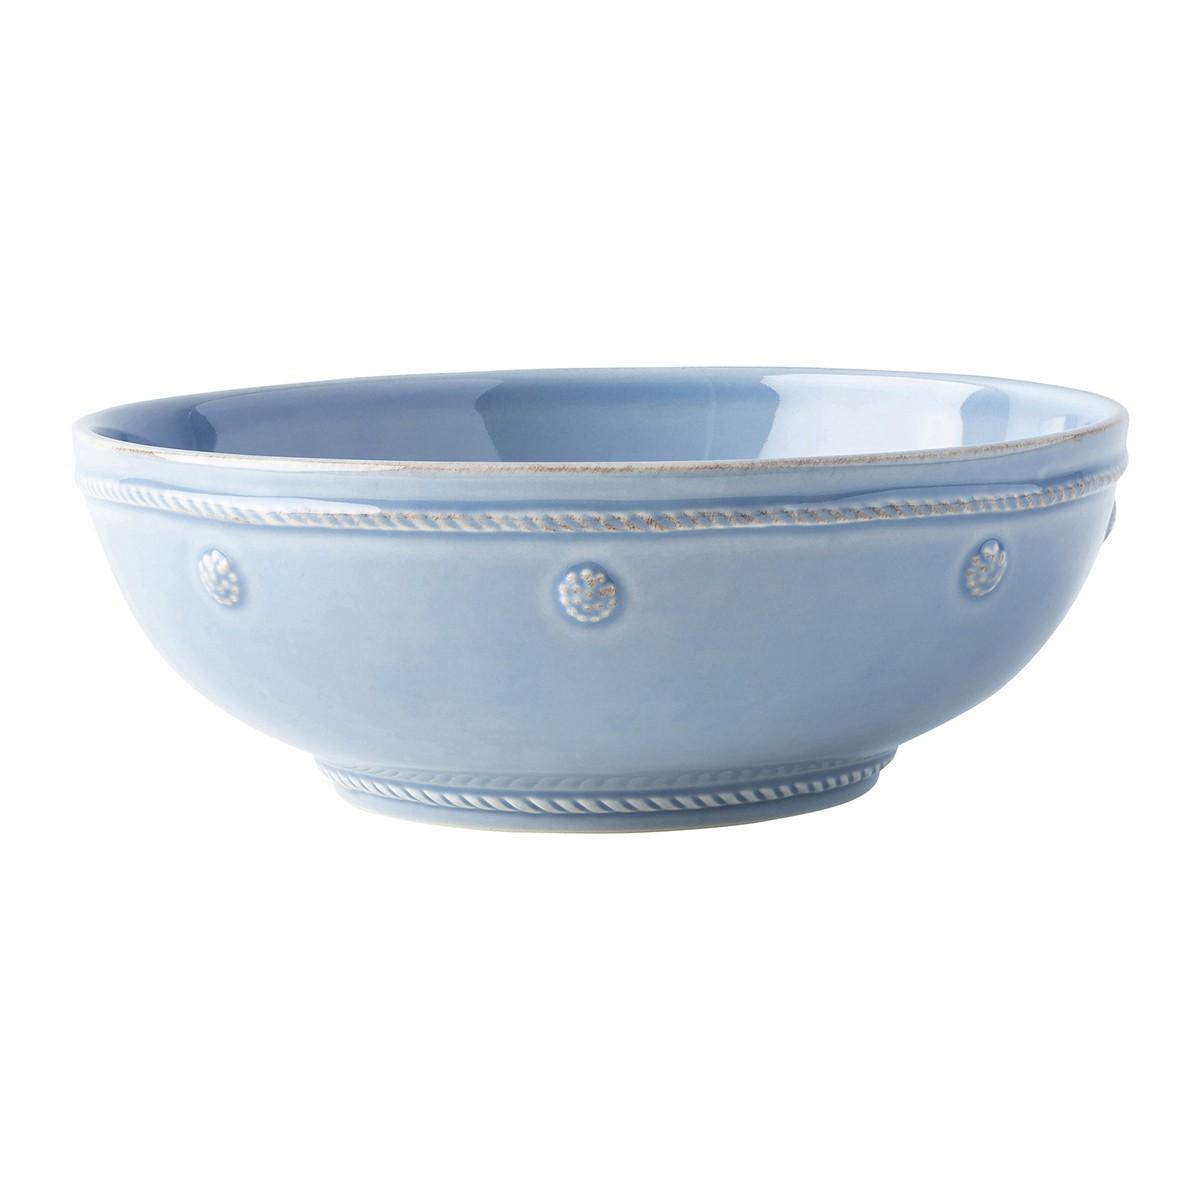 Berry & Thread Coupe Pasta Bowl - Chambray